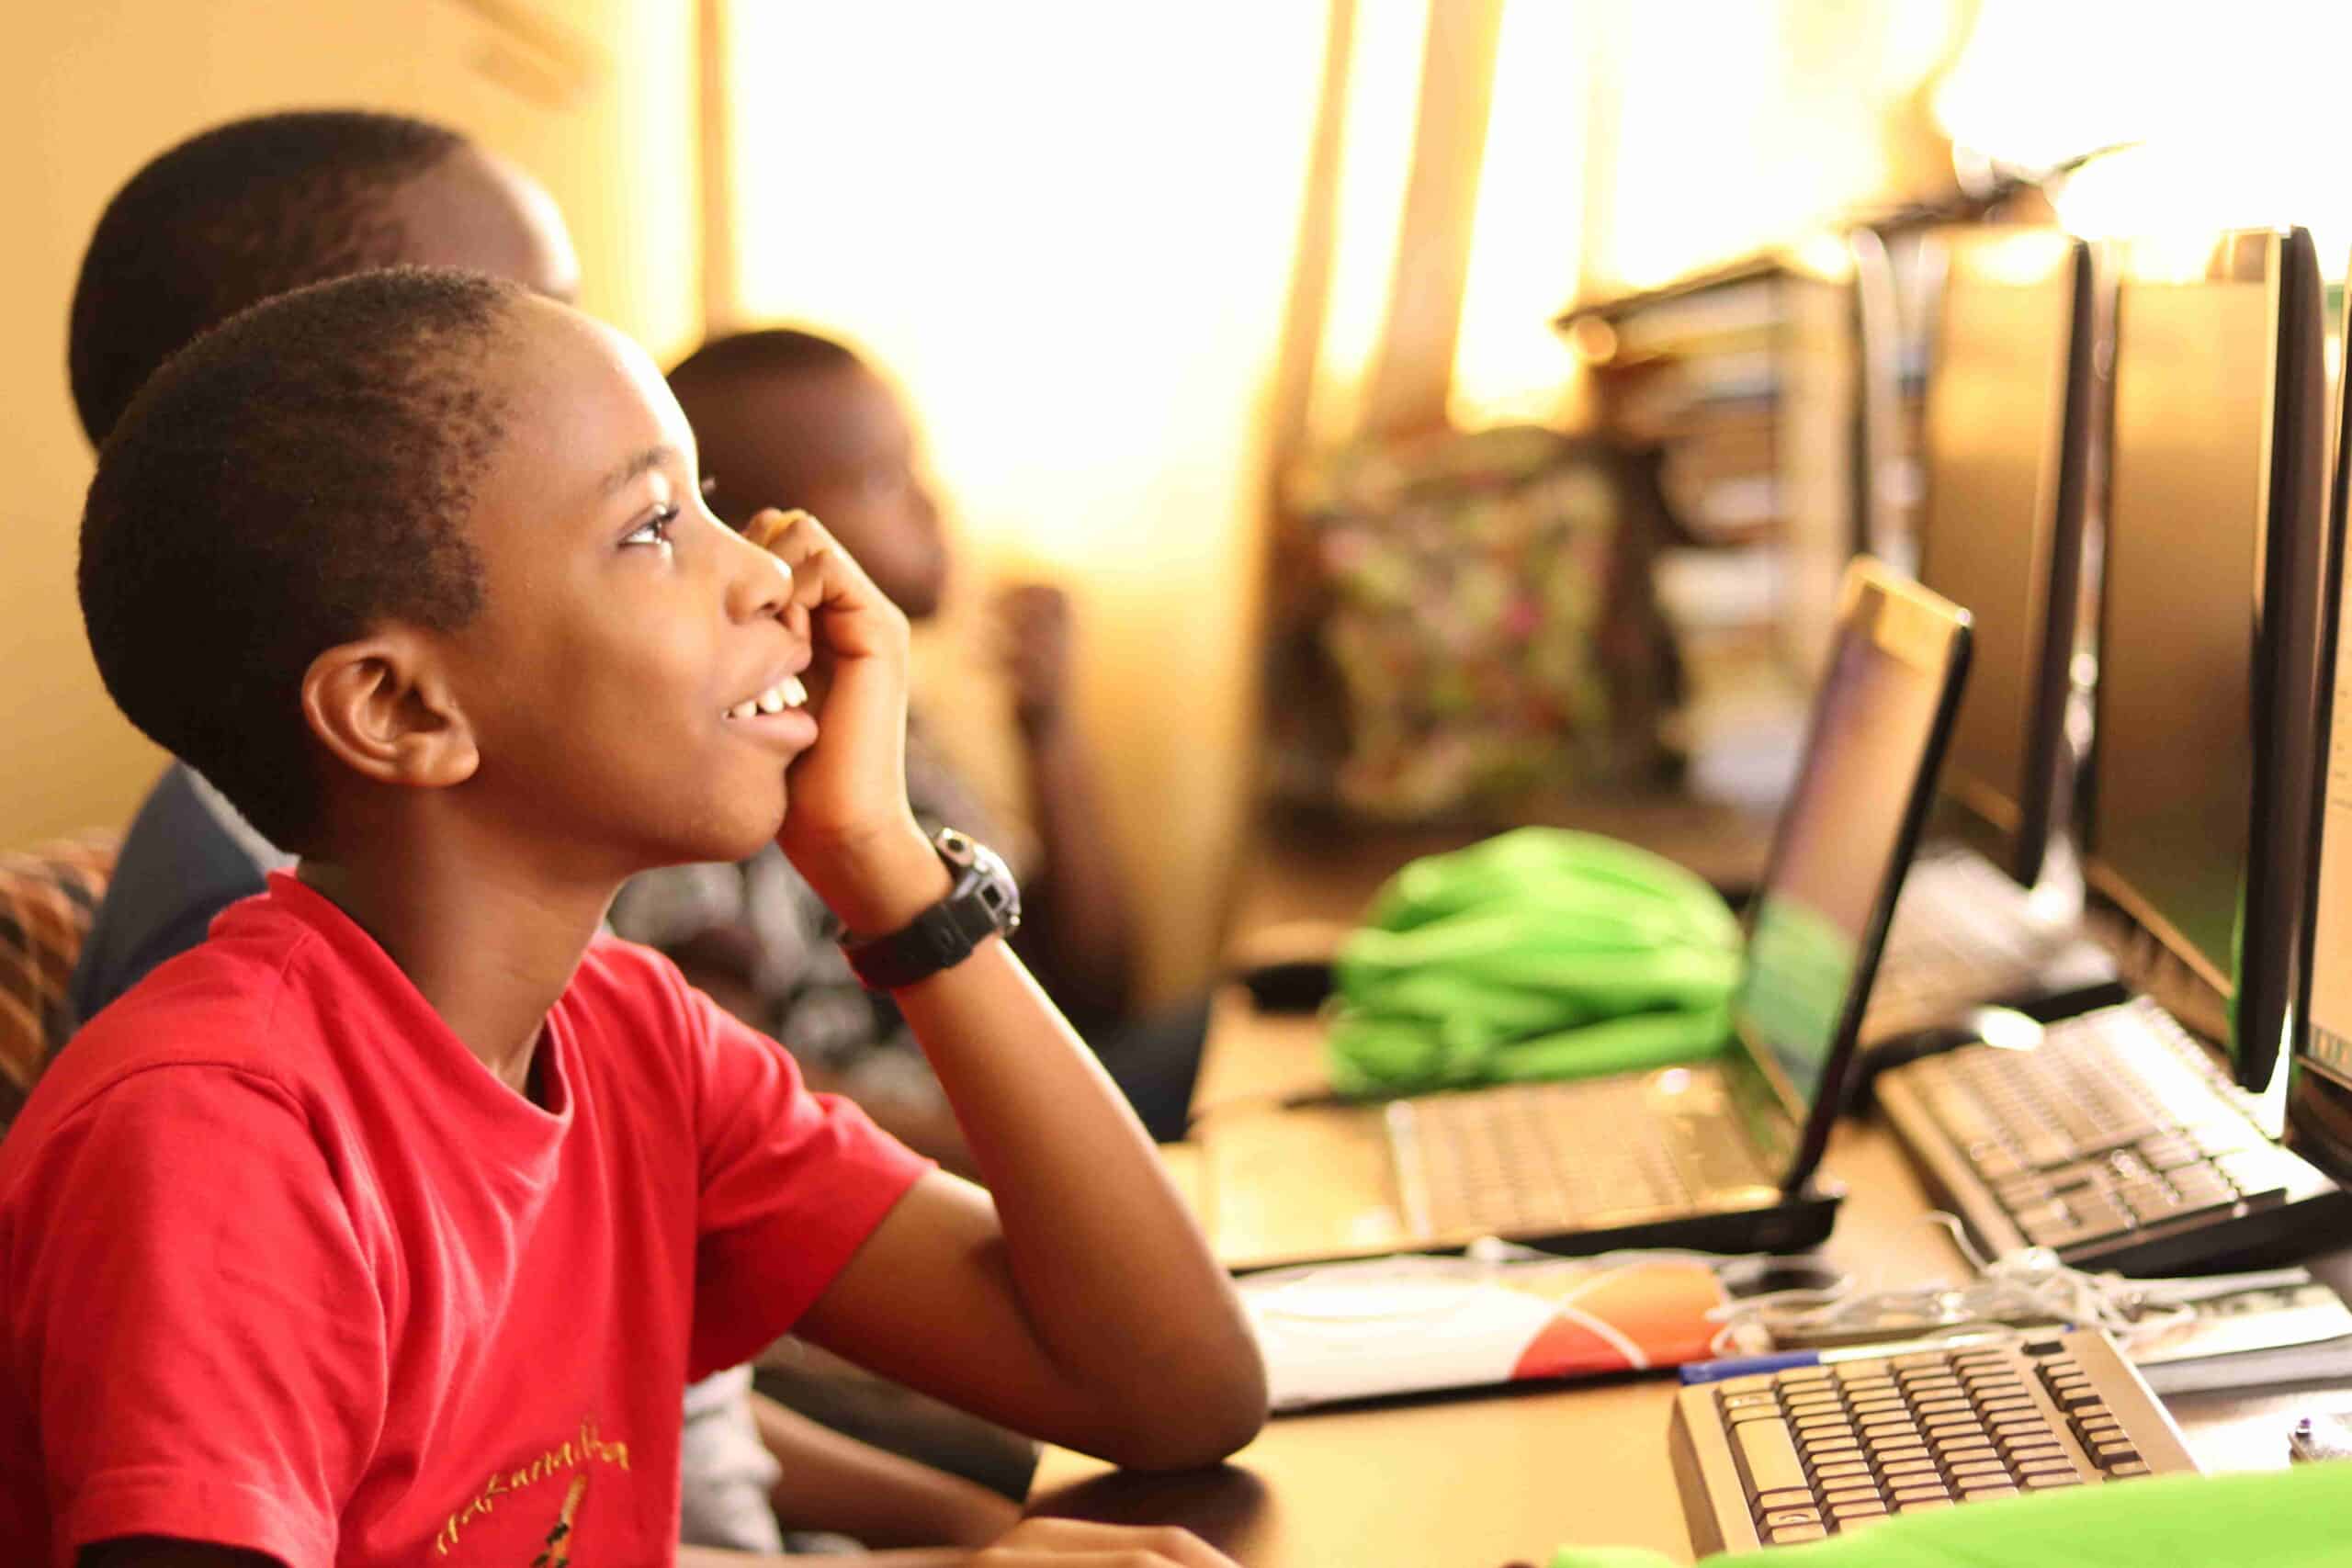 Mobile App Coding Classes for kids and teenagers in Nigeria Port Harcourt Abuja Lagos